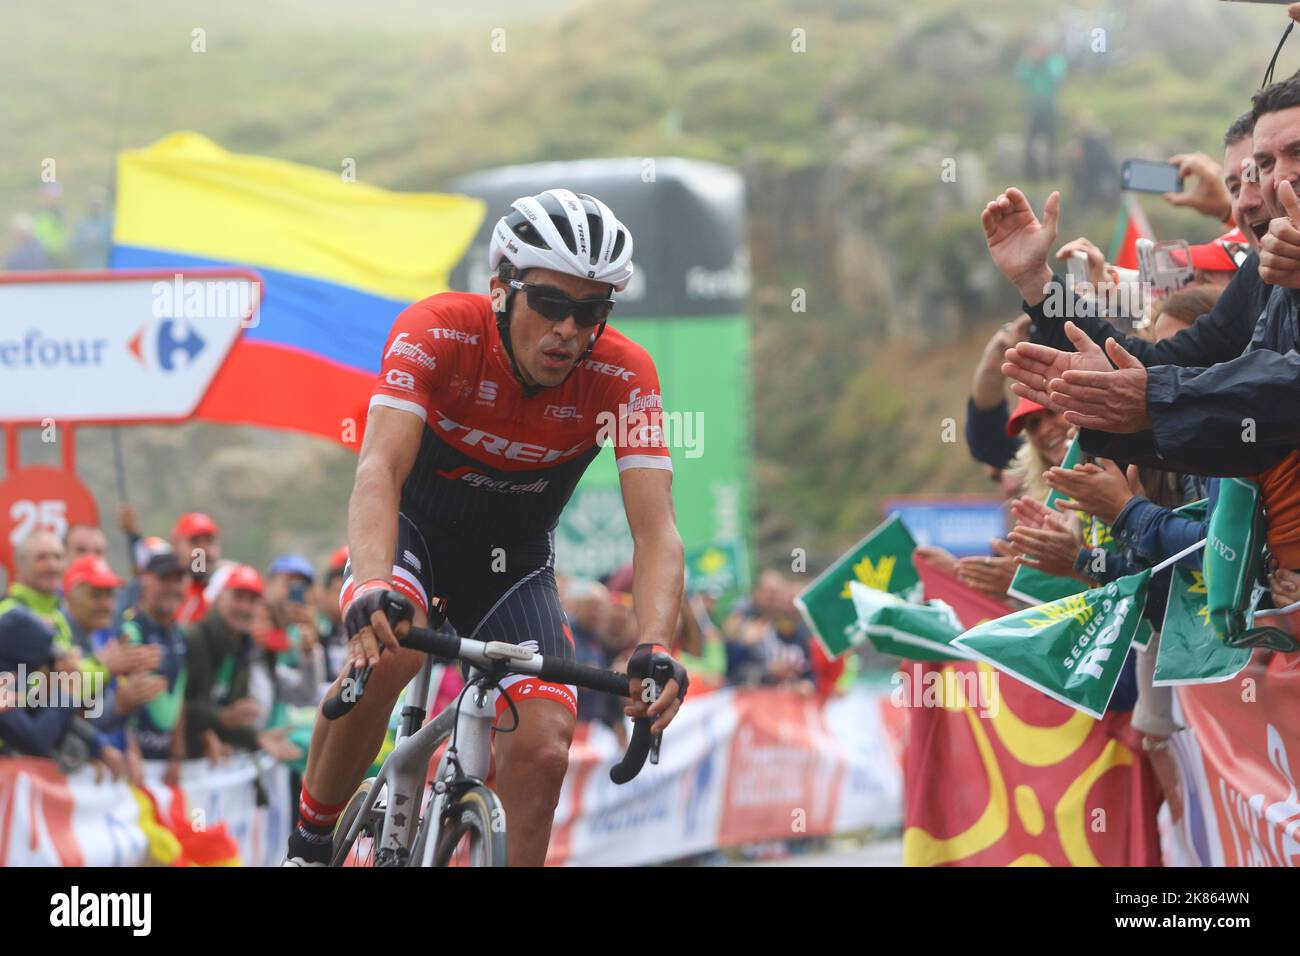 Aberto Contador Spain Trek, comes 2nd in Stage 17 from Villadiego - Los Machucos of the Tour of Spain 2017 Stock Photo